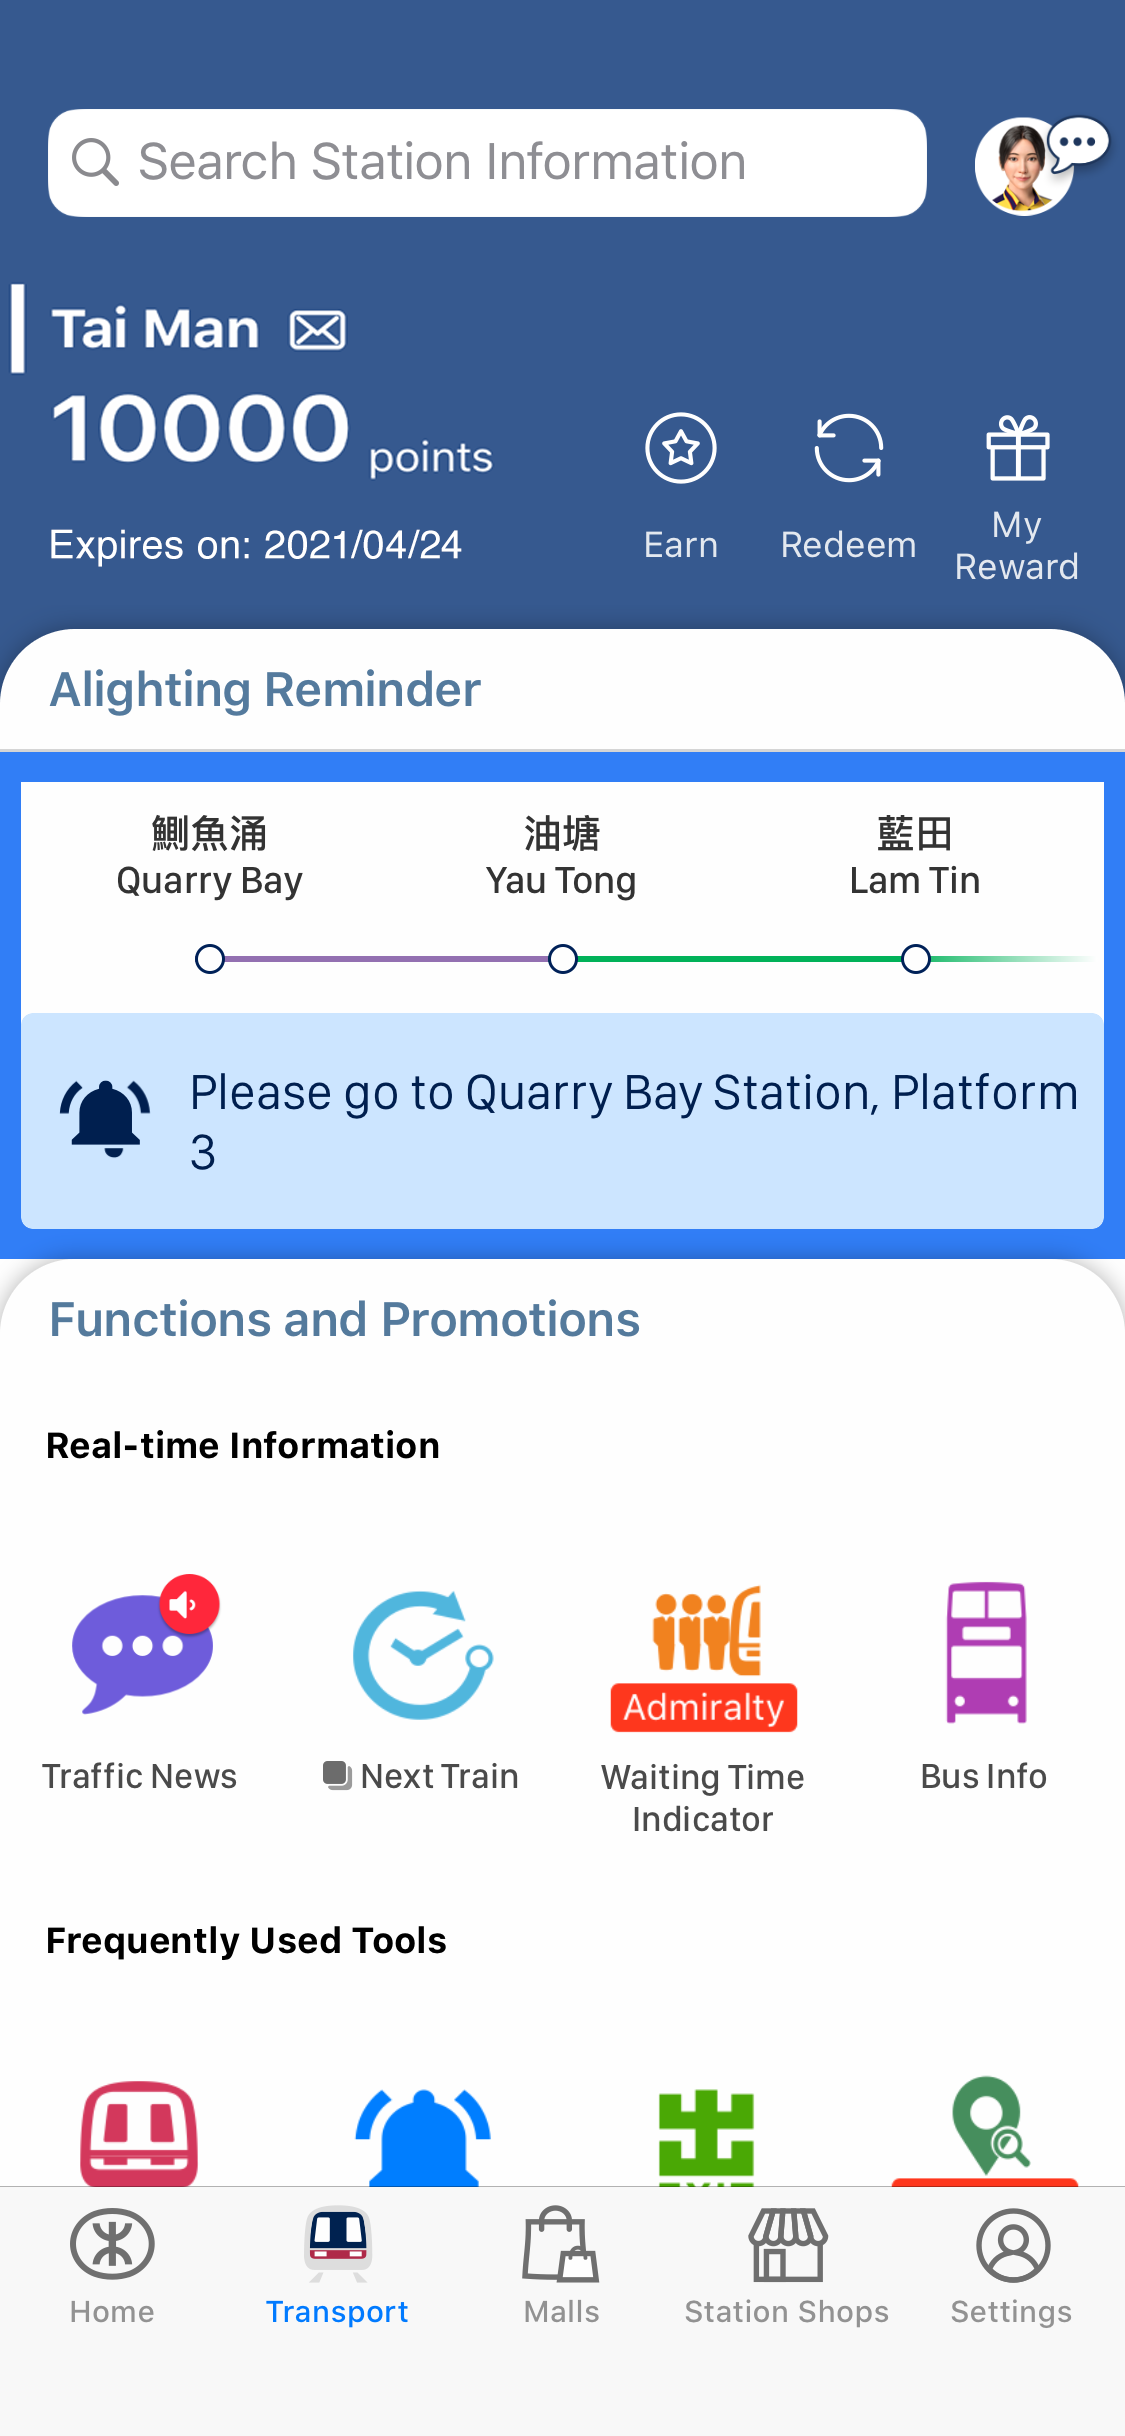 You will receive notifications when the train is approaching interchange and destination station, as well as upon your arrival at the station. In addition, the function will provide your real-time locations during the ride